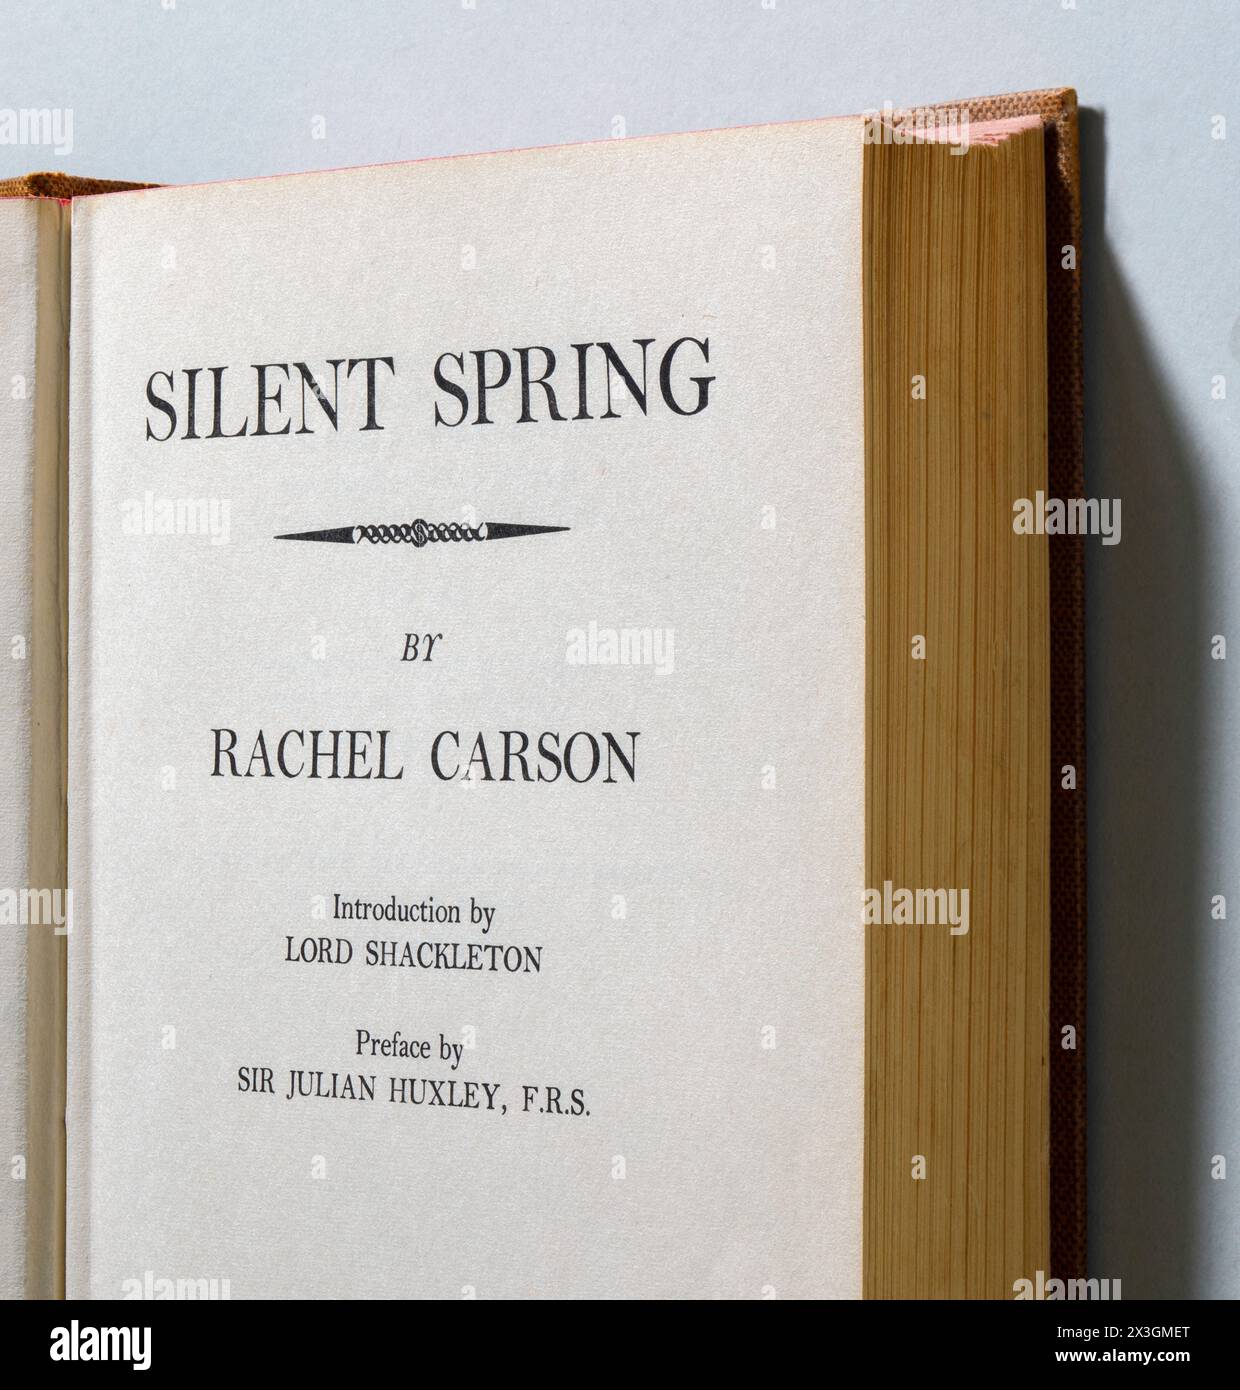 Silent Spring, an environmental science book written by Rachel Carson and published in 1962. The book exposed the damage caused to wildlife due to the extensive use of pesticides. Despite facing criticism from the press and attempts by the chemical industry to ban the book, Carson succeeded in raising public awareness about the environment. As a result, it led to changes in government policies and inspired the ecological movement. Stock Photo